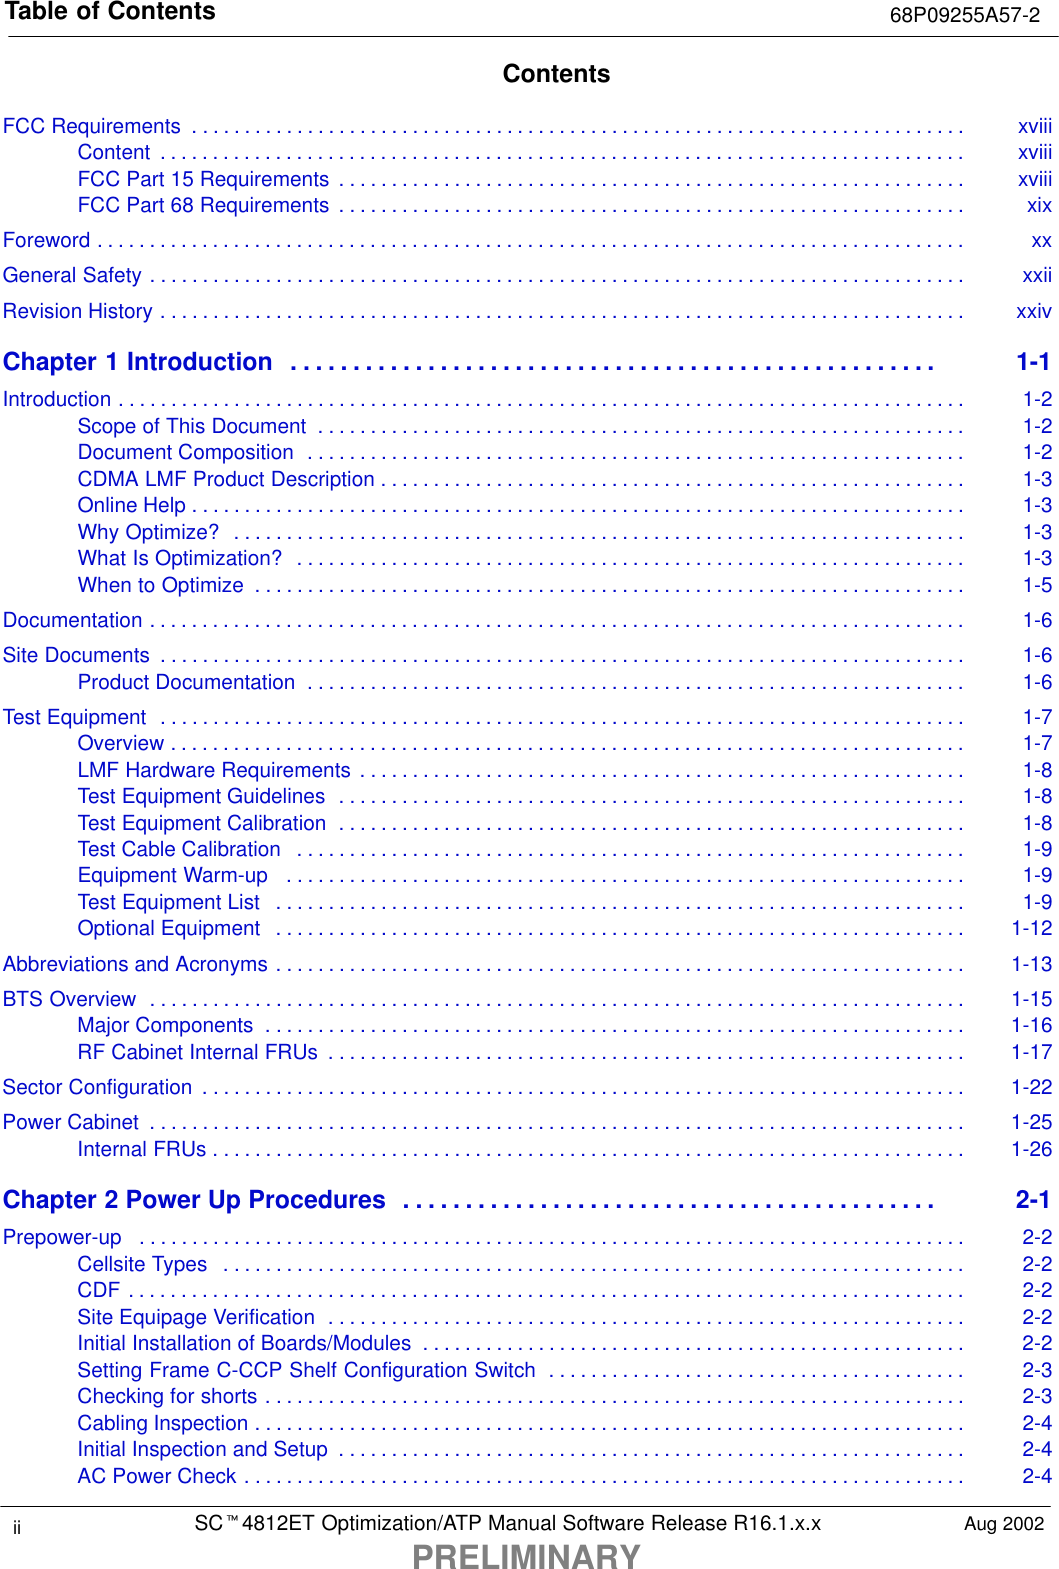 Table of Contents 68P09255A57-2SCt4812ET Optimization/ATP Manual Software Release R16.1.x.xPRELIMINARYii Aug 2002ContentsFCC Requirements xviii. . . . . . . . . . . . . . . . . . . . . . . . . . . . . . . . . . . . . . . . . . . . . . . . . . . . . . . . . . . . . . . . . . . . . . . . . . Content xviii. . . . . . . . . . . . . . . . . . . . . . . . . . . . . . . . . . . . . . . . . . . . . . . . . . . . . . . . . . . . . . . . . . . . . . . . . . . . . FCC Part 15 Requirements xviii. . . . . . . . . . . . . . . . . . . . . . . . . . . . . . . . . . . . . . . . . . . . . . . . . . . . . . . . . . . . FCC Part 68 Requirements xix. . . . . . . . . . . . . . . . . . . . . . . . . . . . . . . . . . . . . . . . . . . . . . . . . . . . . . . . . . . . Foreword xx. . . . . . . . . . . . . . . . . . . . . . . . . . . . . . . . . . . . . . . . . . . . . . . . . . . . . . . . . . . . . . . . . . . . . . . . . . . . . . . . . . . General Safety xxii. . . . . . . . . . . . . . . . . . . . . . . . . . . . . . . . . . . . . . . . . . . . . . . . . . . . . . . . . . . . . . . . . . . . . . . . . . . . . . Revision History xxiv. . . . . . . . . . . . . . . . . . . . . . . . . . . . . . . . . . . . . . . . . . . . . . . . . . . . . . . . . . . . . . . . . . . . . . . . . . . . . Chapter 1 Introduction 1-1. . . . . . . . . . . . . . . . . . . . . . . . . . . . . . . . . . . . . . . . . . . . . . . . . . . . Introduction 1-2. . . . . . . . . . . . . . . . . . . . . . . . . . . . . . . . . . . . . . . . . . . . . . . . . . . . . . . . . . . . . . . . . . . . . . . . . . . . . . . . . Scope of This Document 1-2. . . . . . . . . . . . . . . . . . . . . . . . . . . . . . . . . . . . . . . . . . . . . . . . . . . . . . . . . . . . . . Document Composition 1-2. . . . . . . . . . . . . . . . . . . . . . . . . . . . . . . . . . . . . . . . . . . . . . . . . . . . . . . . . . . . . . . CDMA LMF Product Description 1-3. . . . . . . . . . . . . . . . . . . . . . . . . . . . . . . . . . . . . . . . . . . . . . . . . . . . . . . . Online Help 1-3. . . . . . . . . . . . . . . . . . . . . . . . . . . . . . . . . . . . . . . . . . . . . . . . . . . . . . . . . . . . . . . . . . . . . . . . . . Why Optimize? 1-3. . . . . . . . . . . . . . . . . . . . . . . . . . . . . . . . . . . . . . . . . . . . . . . . . . . . . . . . . . . . . . . . . . . . . . What Is Optimization? 1-3. . . . . . . . . . . . . . . . . . . . . . . . . . . . . . . . . . . . . . . . . . . . . . . . . . . . . . . . . . . . . . . . When to Optimize 1-5. . . . . . . . . . . . . . . . . . . . . . . . . . . . . . . . . . . . . . . . . . . . . . . . . . . . . . . . . . . . . . . . . . . . Documentation 1-6. . . . . . . . . . . . . . . . . . . . . . . . . . . . . . . . . . . . . . . . . . . . . . . . . . . . . . . . . . . . . . . . . . . . . . . . . . . . . . Site Documents 1-6. . . . . . . . . . . . . . . . . . . . . . . . . . . . . . . . . . . . . . . . . . . . . . . . . . . . . . . . . . . . . . . . . . . . . . . . . . . . . Product Documentation 1-6. . . . . . . . . . . . . . . . . . . . . . . . . . . . . . . . . . . . . . . . . . . . . . . . . . . . . . . . . . . . . . . Test Equipment 1-7. . . . . . . . . . . . . . . . . . . . . . . . . . . . . . . . . . . . . . . . . . . . . . . . . . . . . . . . . . . . . . . . . . . . . . . . . . . . . Overview 1-7. . . . . . . . . . . . . . . . . . . . . . . . . . . . . . . . . . . . . . . . . . . . . . . . . . . . . . . . . . . . . . . . . . . . . . . . . . . . LMF Hardware Requirements 1-8. . . . . . . . . . . . . . . . . . . . . . . . . . . . . . . . . . . . . . . . . . . . . . . . . . . . . . . . . . Test Equipment Guidelines 1-8. . . . . . . . . . . . . . . . . . . . . . . . . . . . . . . . . . . . . . . . . . . . . . . . . . . . . . . . . . . . Test Equipment Calibration 1-8. . . . . . . . . . . . . . . . . . . . . . . . . . . . . . . . . . . . . . . . . . . . . . . . . . . . . . . . . . . . Test Cable Calibration 1-9. . . . . . . . . . . . . . . . . . . . . . . . . . . . . . . . . . . . . . . . . . . . . . . . . . . . . . . . . . . . . . . . Equipment Warm-up 1-9. . . . . . . . . . . . . . . . . . . . . . . . . . . . . . . . . . . . . . . . . . . . . . . . . . . . . . . . . . . . . . . . . Test Equipment List 1-9. . . . . . . . . . . . . . . . . . . . . . . . . . . . . . . . . . . . . . . . . . . . . . . . . . . . . . . . . . . . . . . . . . Optional Equipment 1-12. . . . . . . . . . . . . . . . . . . . . . . . . . . . . . . . . . . . . . . . . . . . . . . . . . . . . . . . . . . . . . . . . . Abbreviations and Acronyms 1-13. . . . . . . . . . . . . . . . . . . . . . . . . . . . . . . . . . . . . . . . . . . . . . . . . . . . . . . . . . . . . . . . . . BTS Overview 1-15. . . . . . . . . . . . . . . . . . . . . . . . . . . . . . . . . . . . . . . . . . . . . . . . . . . . . . . . . . . . . . . . . . . . . . . . . . . . . . Major Components 1-16. . . . . . . . . . . . . . . . . . . . . . . . . . . . . . . . . . . . . . . . . . . . . . . . . . . . . . . . . . . . . . . . . . . RF Cabinet Internal FRUs 1-17. . . . . . . . . . . . . . . . . . . . . . . . . . . . . . . . . . . . . . . . . . . . . . . . . . . . . . . . . . . . . Sector Configuration 1-22. . . . . . . . . . . . . . . . . . . . . . . . . . . . . . . . . . . . . . . . . . . . . . . . . . . . . . . . . . . . . . . . . . . . . . . . . Power Cabinet 1-25. . . . . . . . . . . . . . . . . . . . . . . . . . . . . . . . . . . . . . . . . . . . . . . . . . . . . . . . . . . . . . . . . . . . . . . . . . . . . . Internal FRUs 1-26. . . . . . . . . . . . . . . . . . . . . . . . . . . . . . . . . . . . . . . . . . . . . . . . . . . . . . . . . . . . . . . . . . . . . . . . Chapter 2 Power Up Procedures 2-1. . . . . . . . . . . . . . . . . . . . . . . . . . . . . . . . . . . . . . . . . . . Prepower-up 2-2. . . . . . . . . . . . . . . . . . . . . . . . . . . . . . . . . . . . . . . . . . . . . . . . . . . . . . . . . . . . . . . . . . . . . . . . . . . . . . . Cellsite Types 2-2. . . . . . . . . . . . . . . . . . . . . . . . . . . . . . . . . . . . . . . . . . . . . . . . . . . . . . . . . . . . . . . . . . . . . . . CDF 2-2. . . . . . . . . . . . . . . . . . . . . . . . . . . . . . . . . . . . . . . . . . . . . . . . . . . . . . . . . . . . . . . . . . . . . . . . . . . . . . . . Site Equipage Verification 2-2. . . . . . . . . . . . . . . . . . . . . . . . . . . . . . . . . . . . . . . . . . . . . . . . . . . . . . . . . . . . . Initial Installation of Boards/Modules 2-2. . . . . . . . . . . . . . . . . . . . . . . . . . . . . . . . . . . . . . . . . . . . . . . . . . . . Setting Frame C-CCP Shelf Configuration Switch 2-3. . . . . . . . . . . . . . . . . . . . . . . . . . . . . . . . . . . . . . . . Checking for shorts 2-3. . . . . . . . . . . . . . . . . . . . . . . . . . . . . . . . . . . . . . . . . . . . . . . . . . . . . . . . . . . . . . . . . . . Cabling Inspection 2-4. . . . . . . . . . . . . . . . . . . . . . . . . . . . . . . . . . . . . . . . . . . . . . . . . . . . . . . . . . . . . . . . . . . . Initial Inspection and Setup 2-4. . . . . . . . . . . . . . . . . . . . . . . . . . . . . . . . . . . . . . . . . . . . . . . . . . . . . . . . . . . . AC Power Check 2-4. . . . . . . . . . . . . . . . . . . . . . . . . . . . . . . . . . . . . . . . . . . . . . . . . . . . . . . . . . . . . . . . . . . . . 